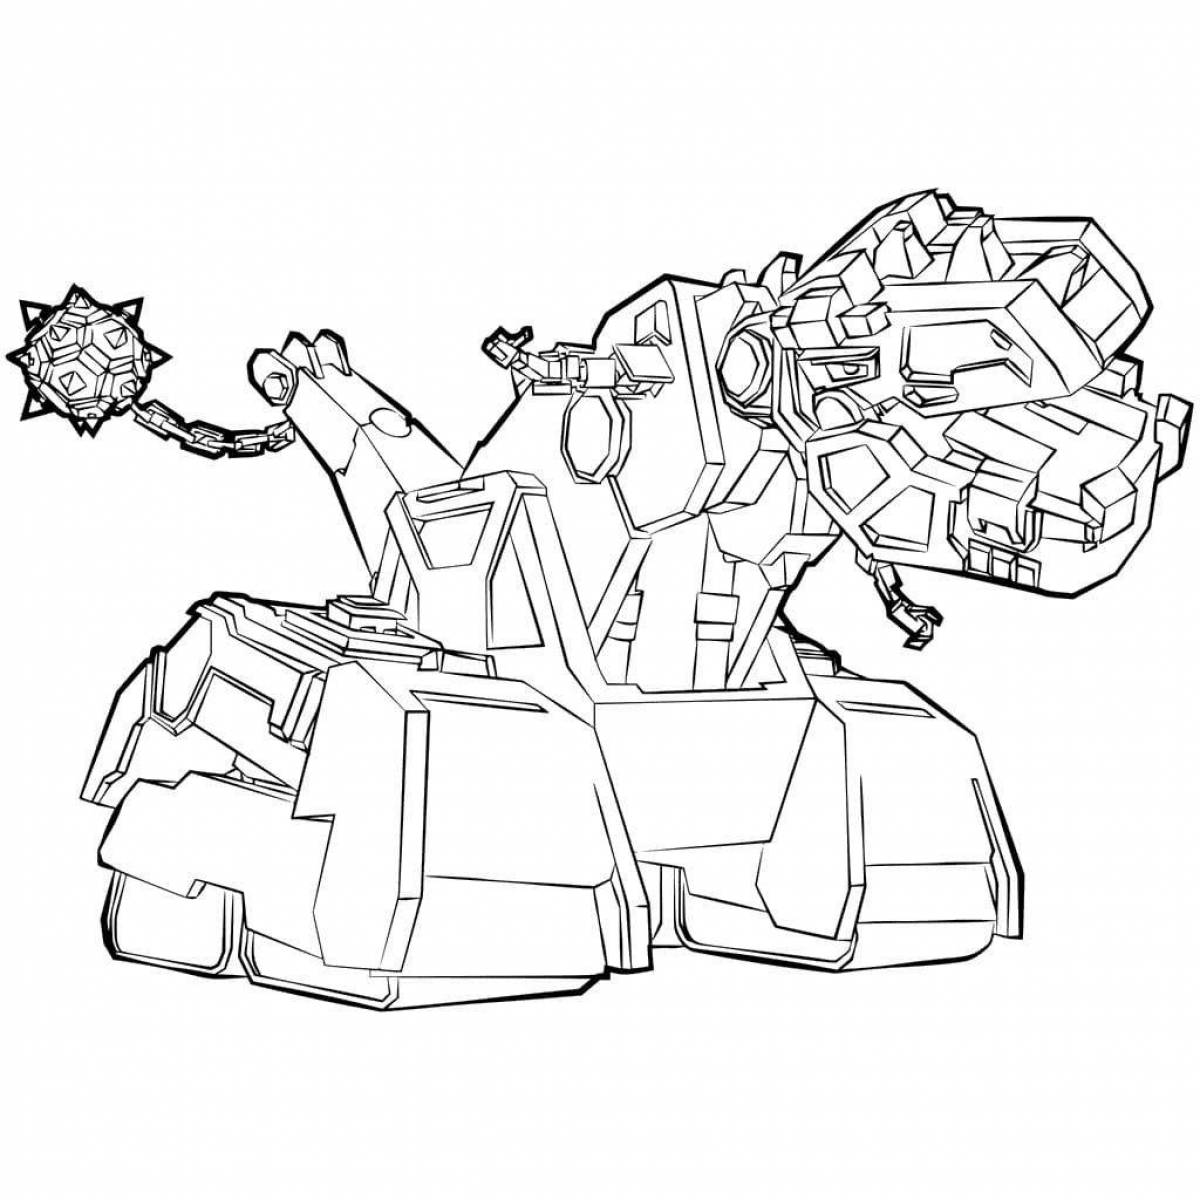 Coloring page funny team of dinosaurs